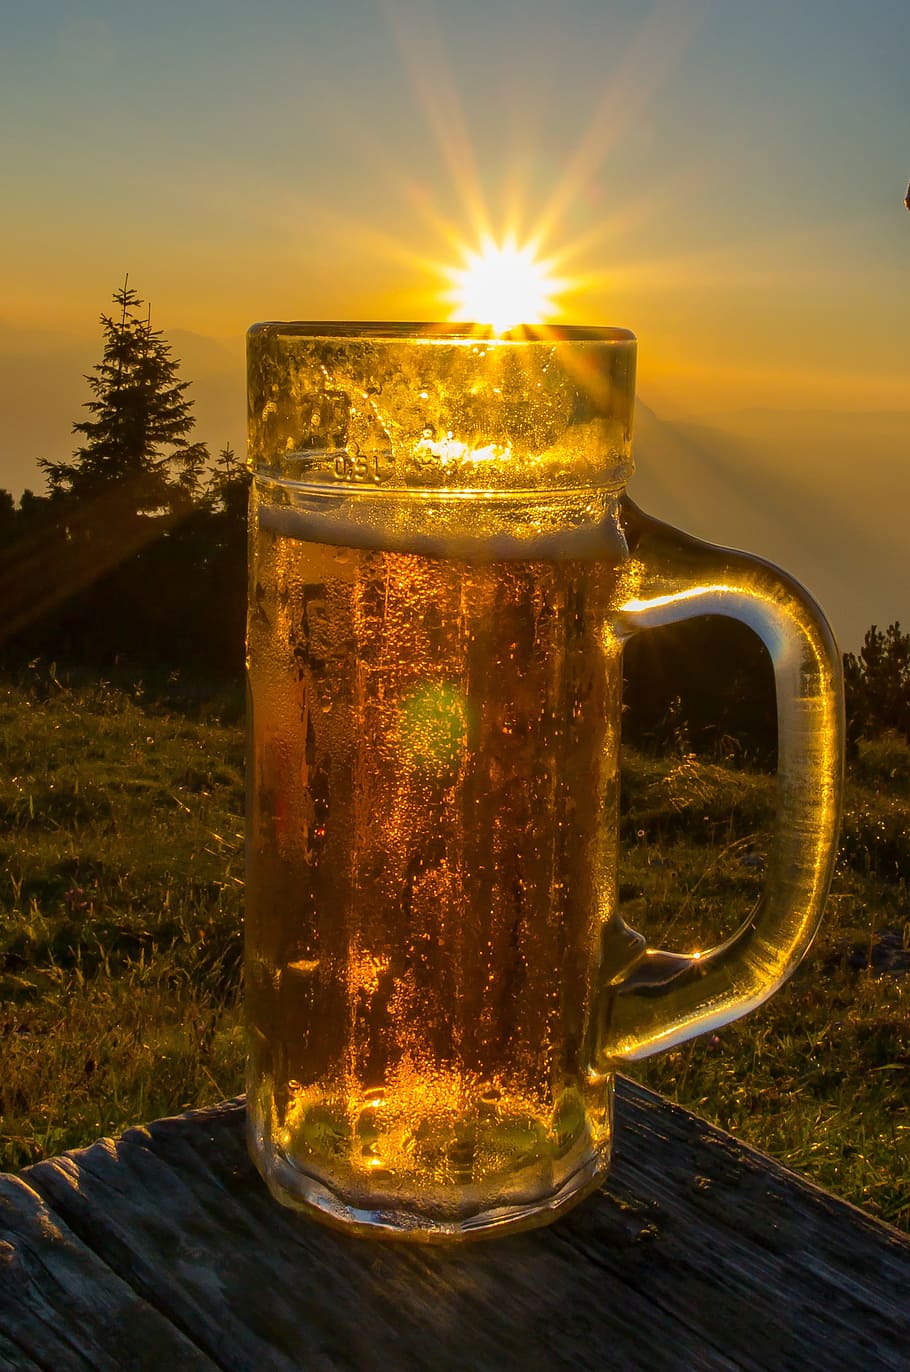 clear, glass beer mug, side, table, golden, hour, beer, sunshine, mountains, mountain hut